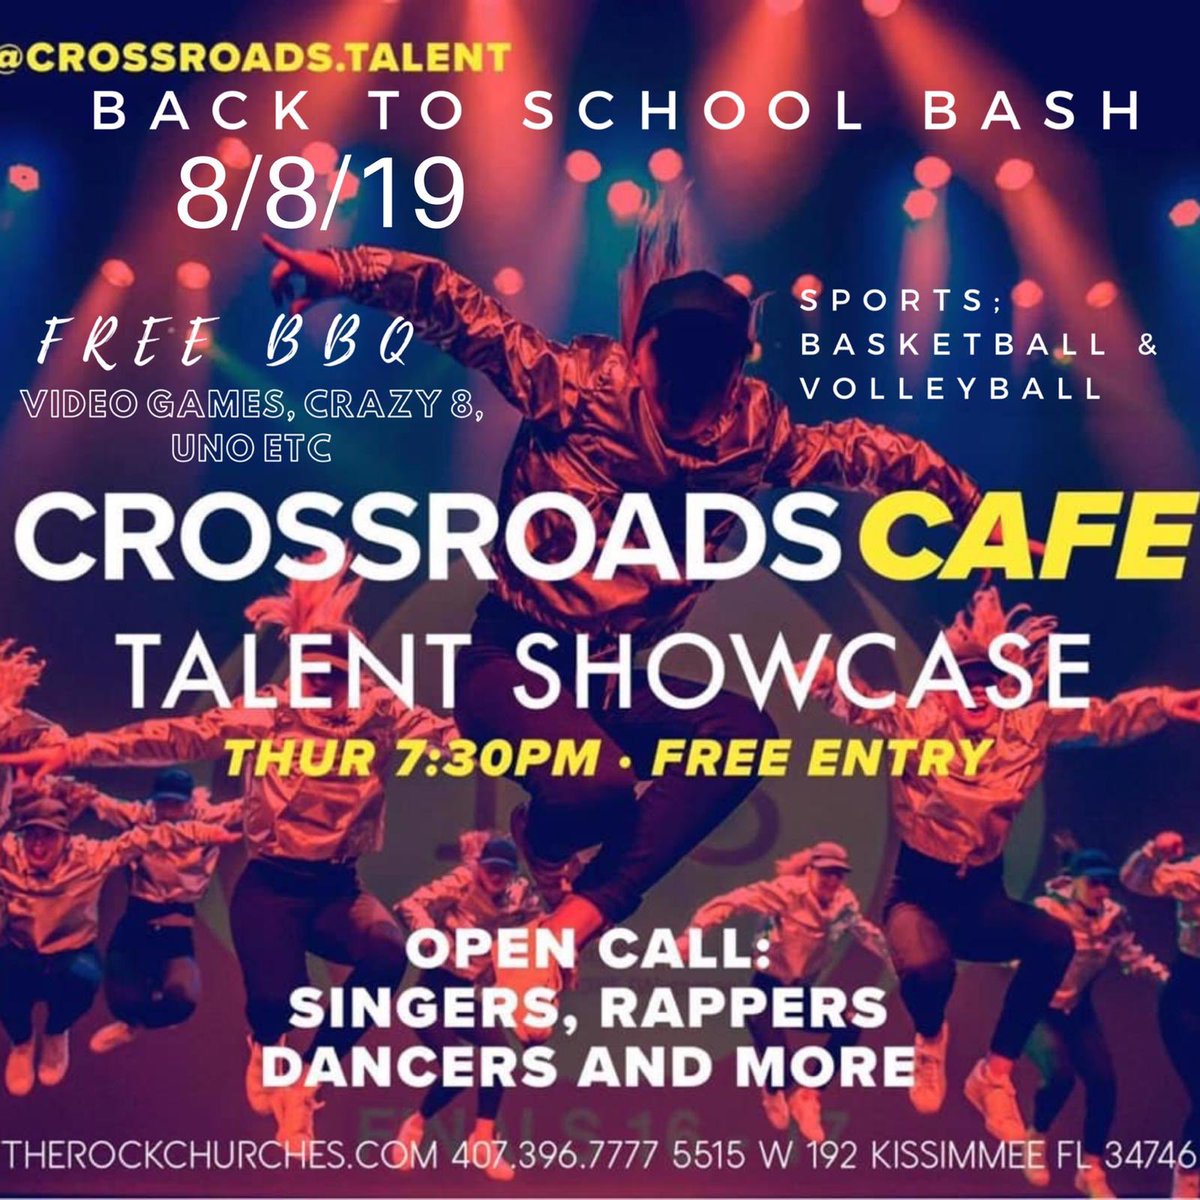 TOMORROW, TOMORROW ‼️
Show off what makes you, you. 
#talent #dance #music #showcase #videogames #poetry #floridawriters